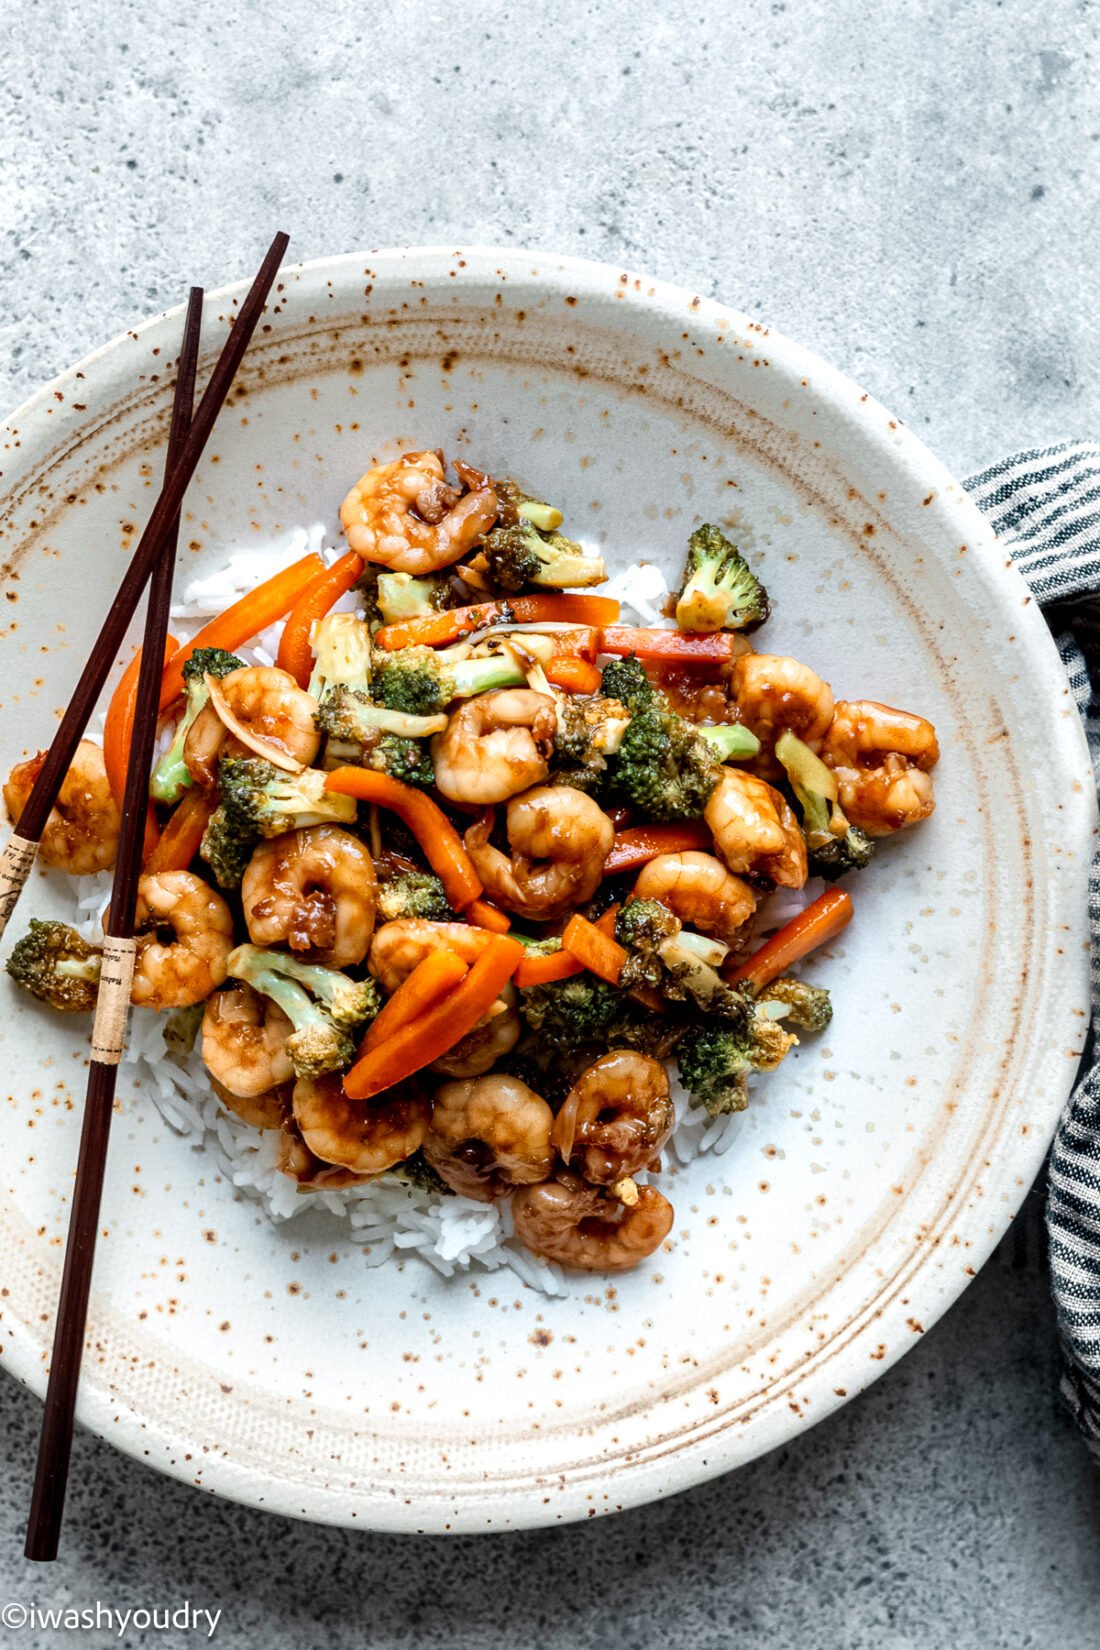 plate of shrimp with broccoli and carrots over white rice.